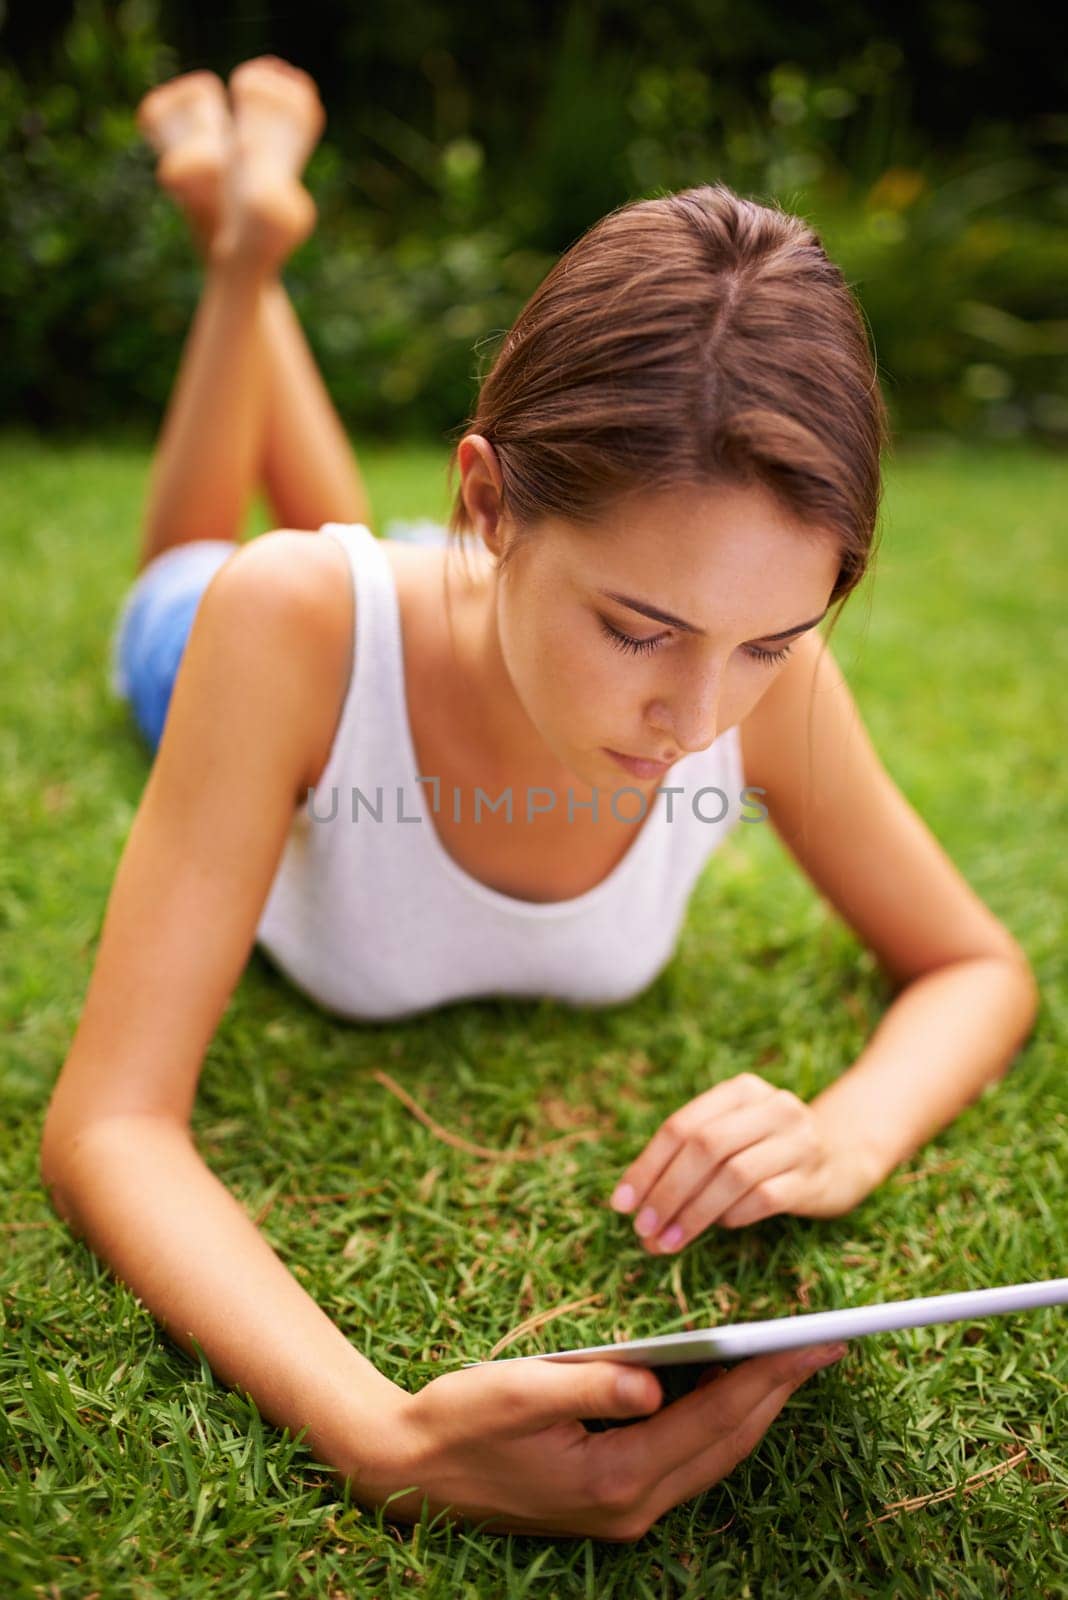 Park, grass and woman relax with tablet, backyard, outdoor and garden to chat or text on social media. Summer, nature and girl online with connection to internet to read romance ebook on site of app.